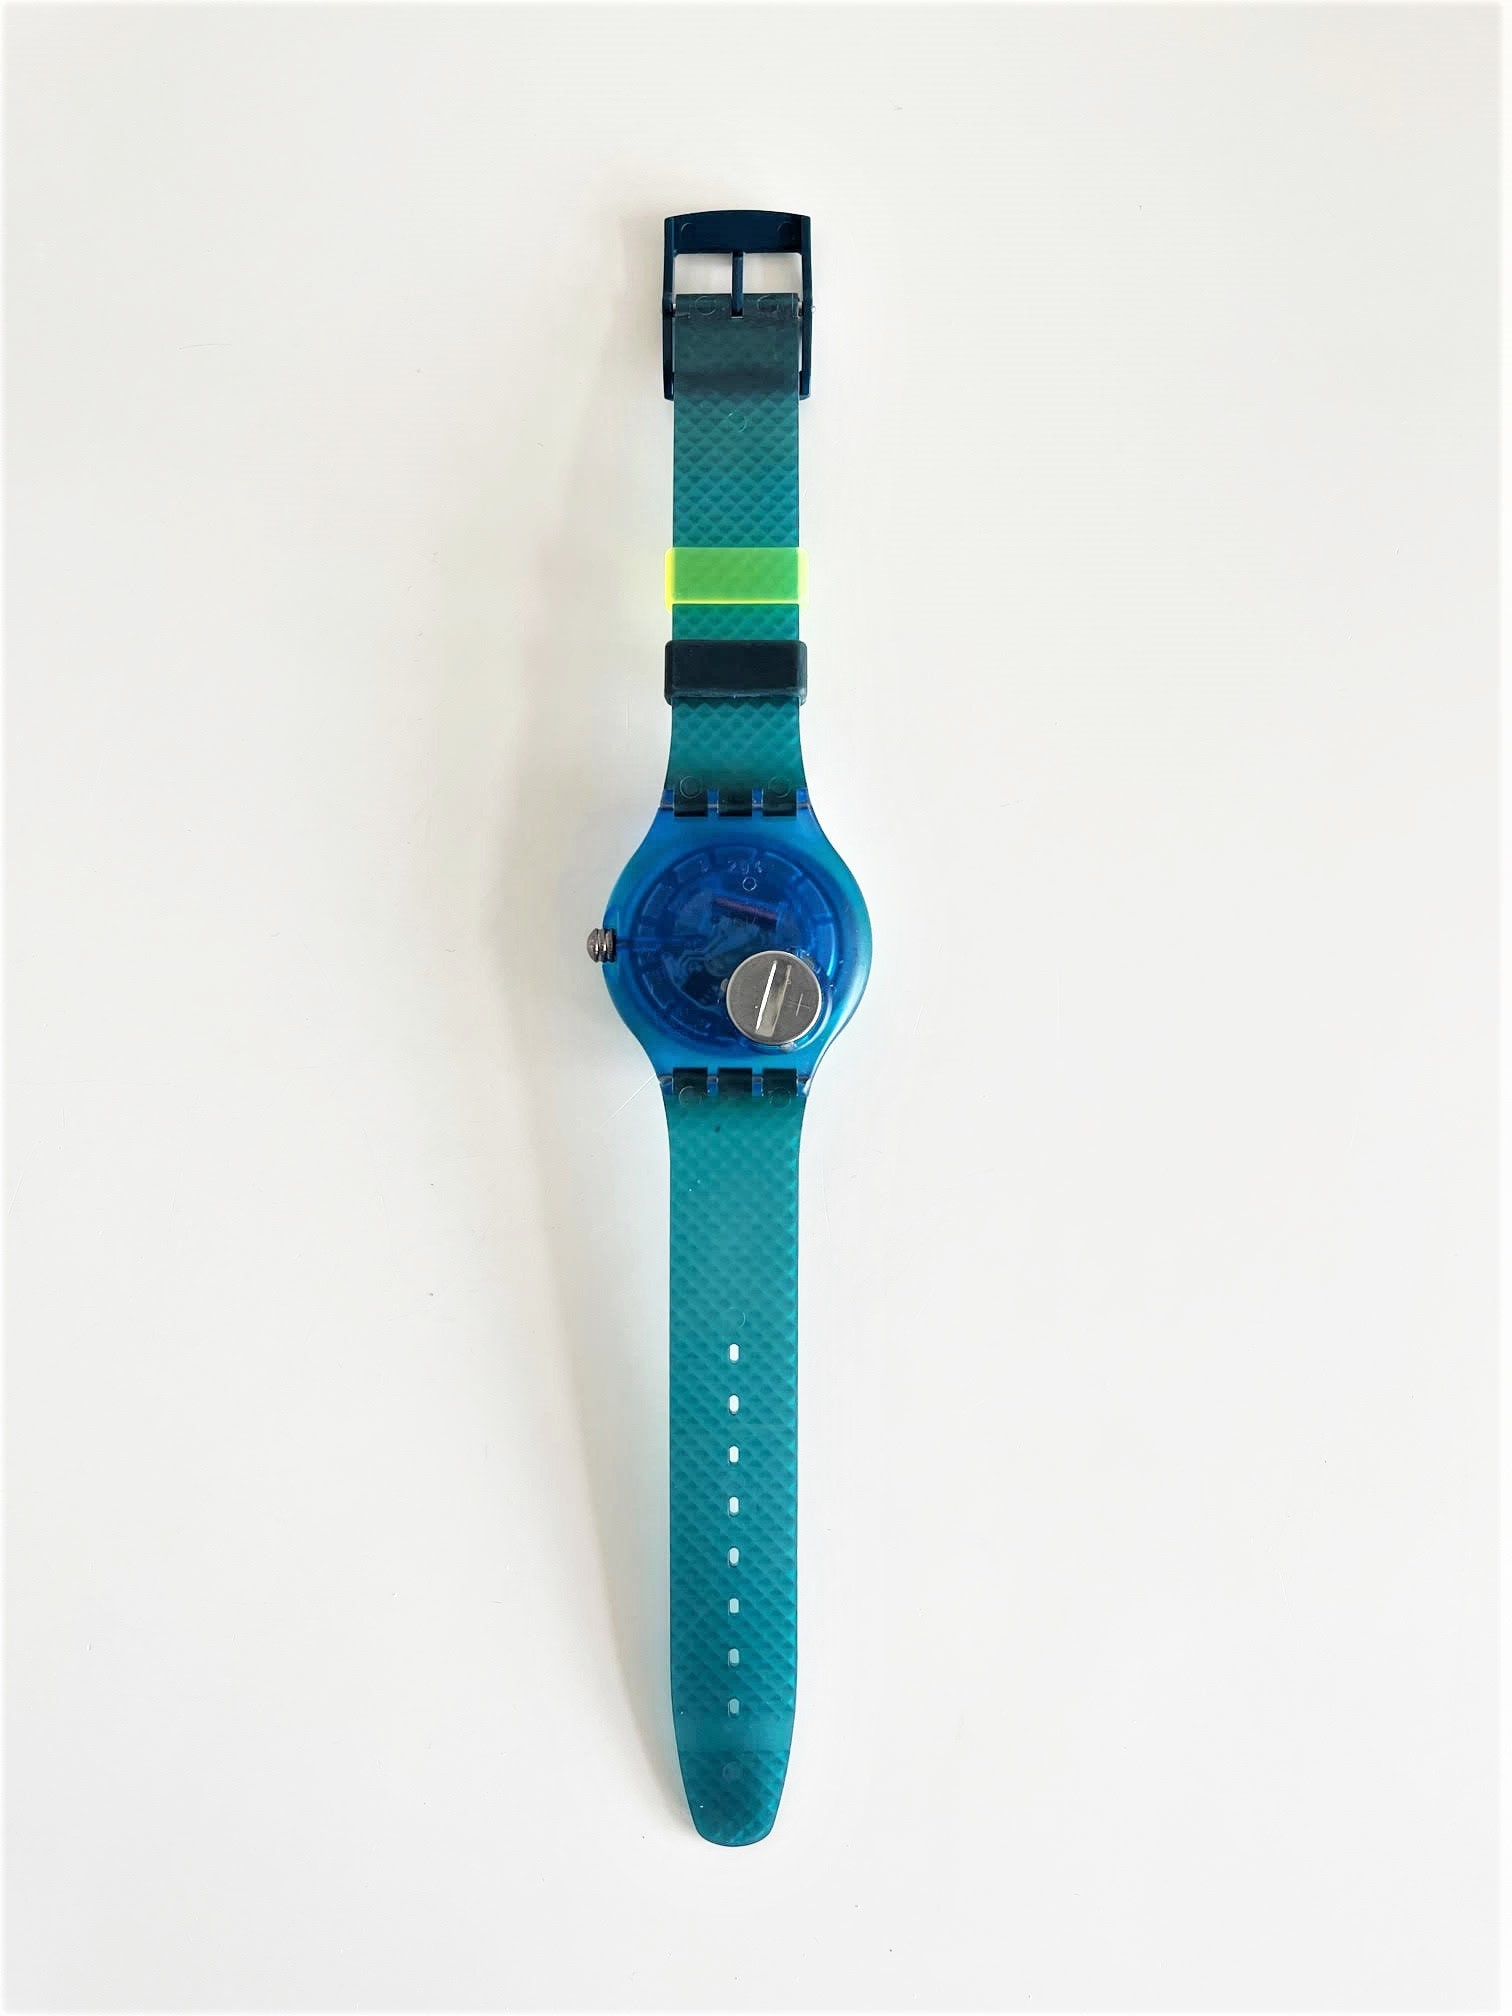 NEW in Box 1990 Vintage Swatch Scuba 200 BLUE MOON SDN100 